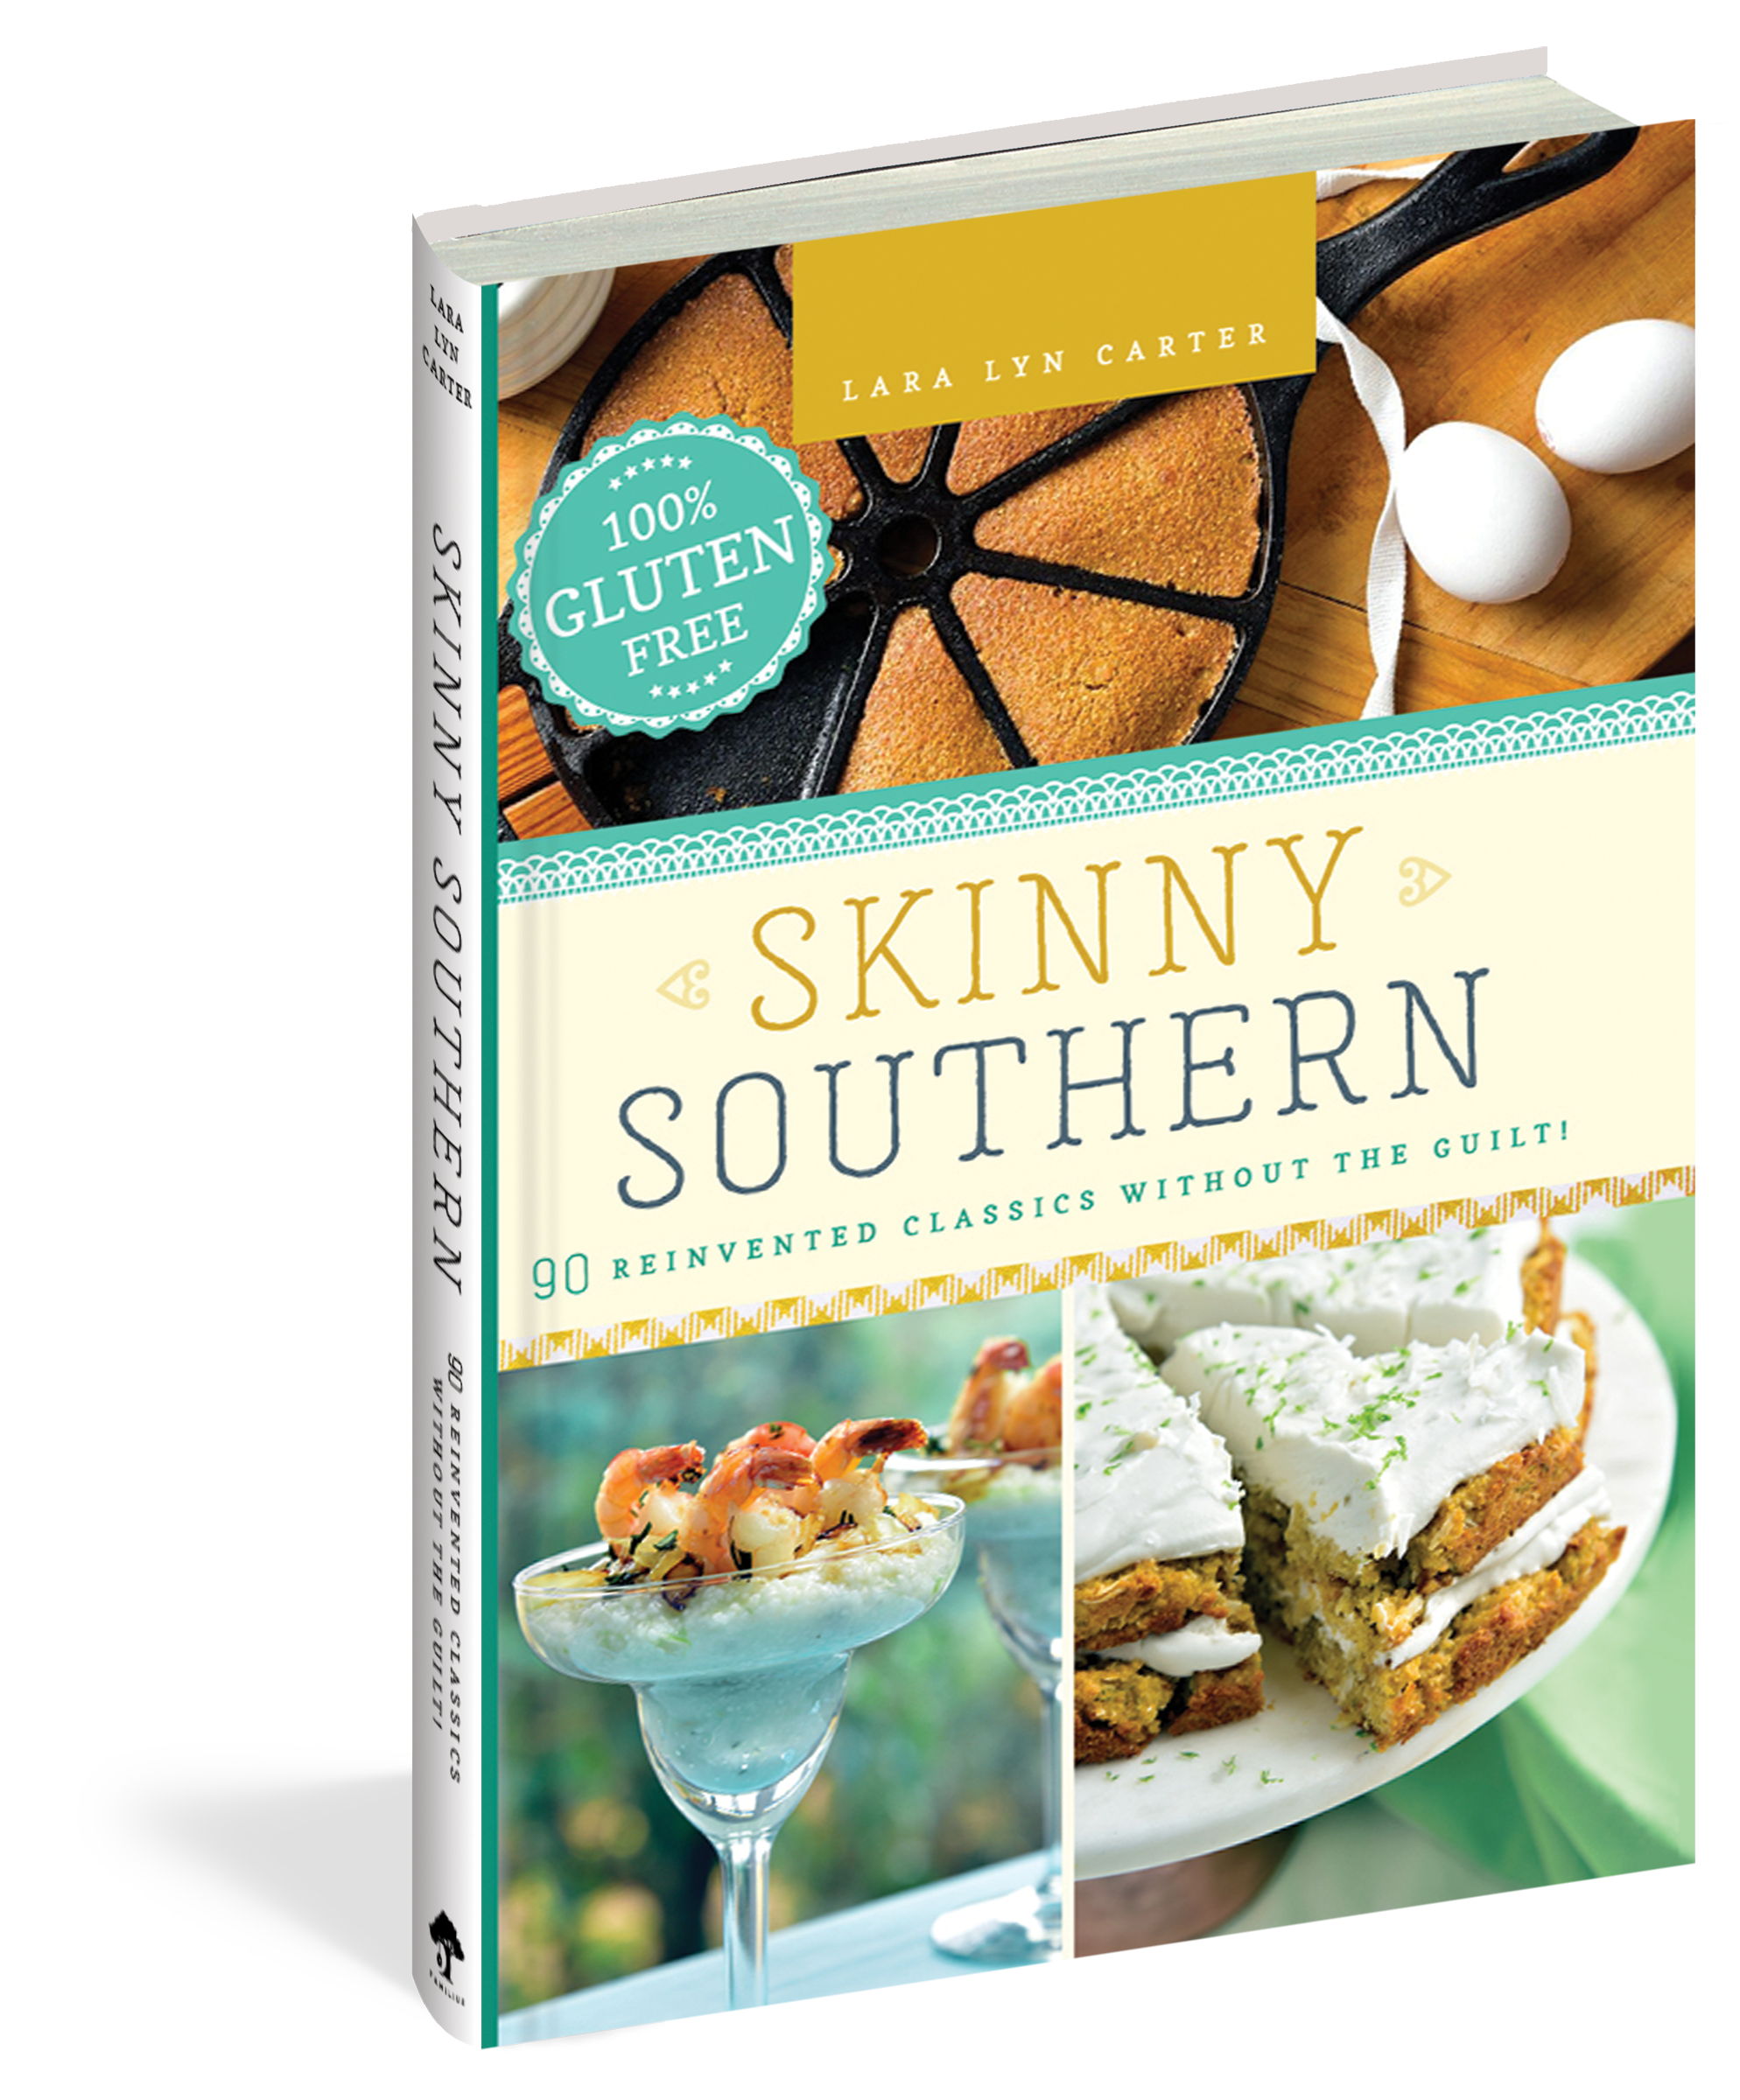 The cover of the cookbook Skinny Southern.